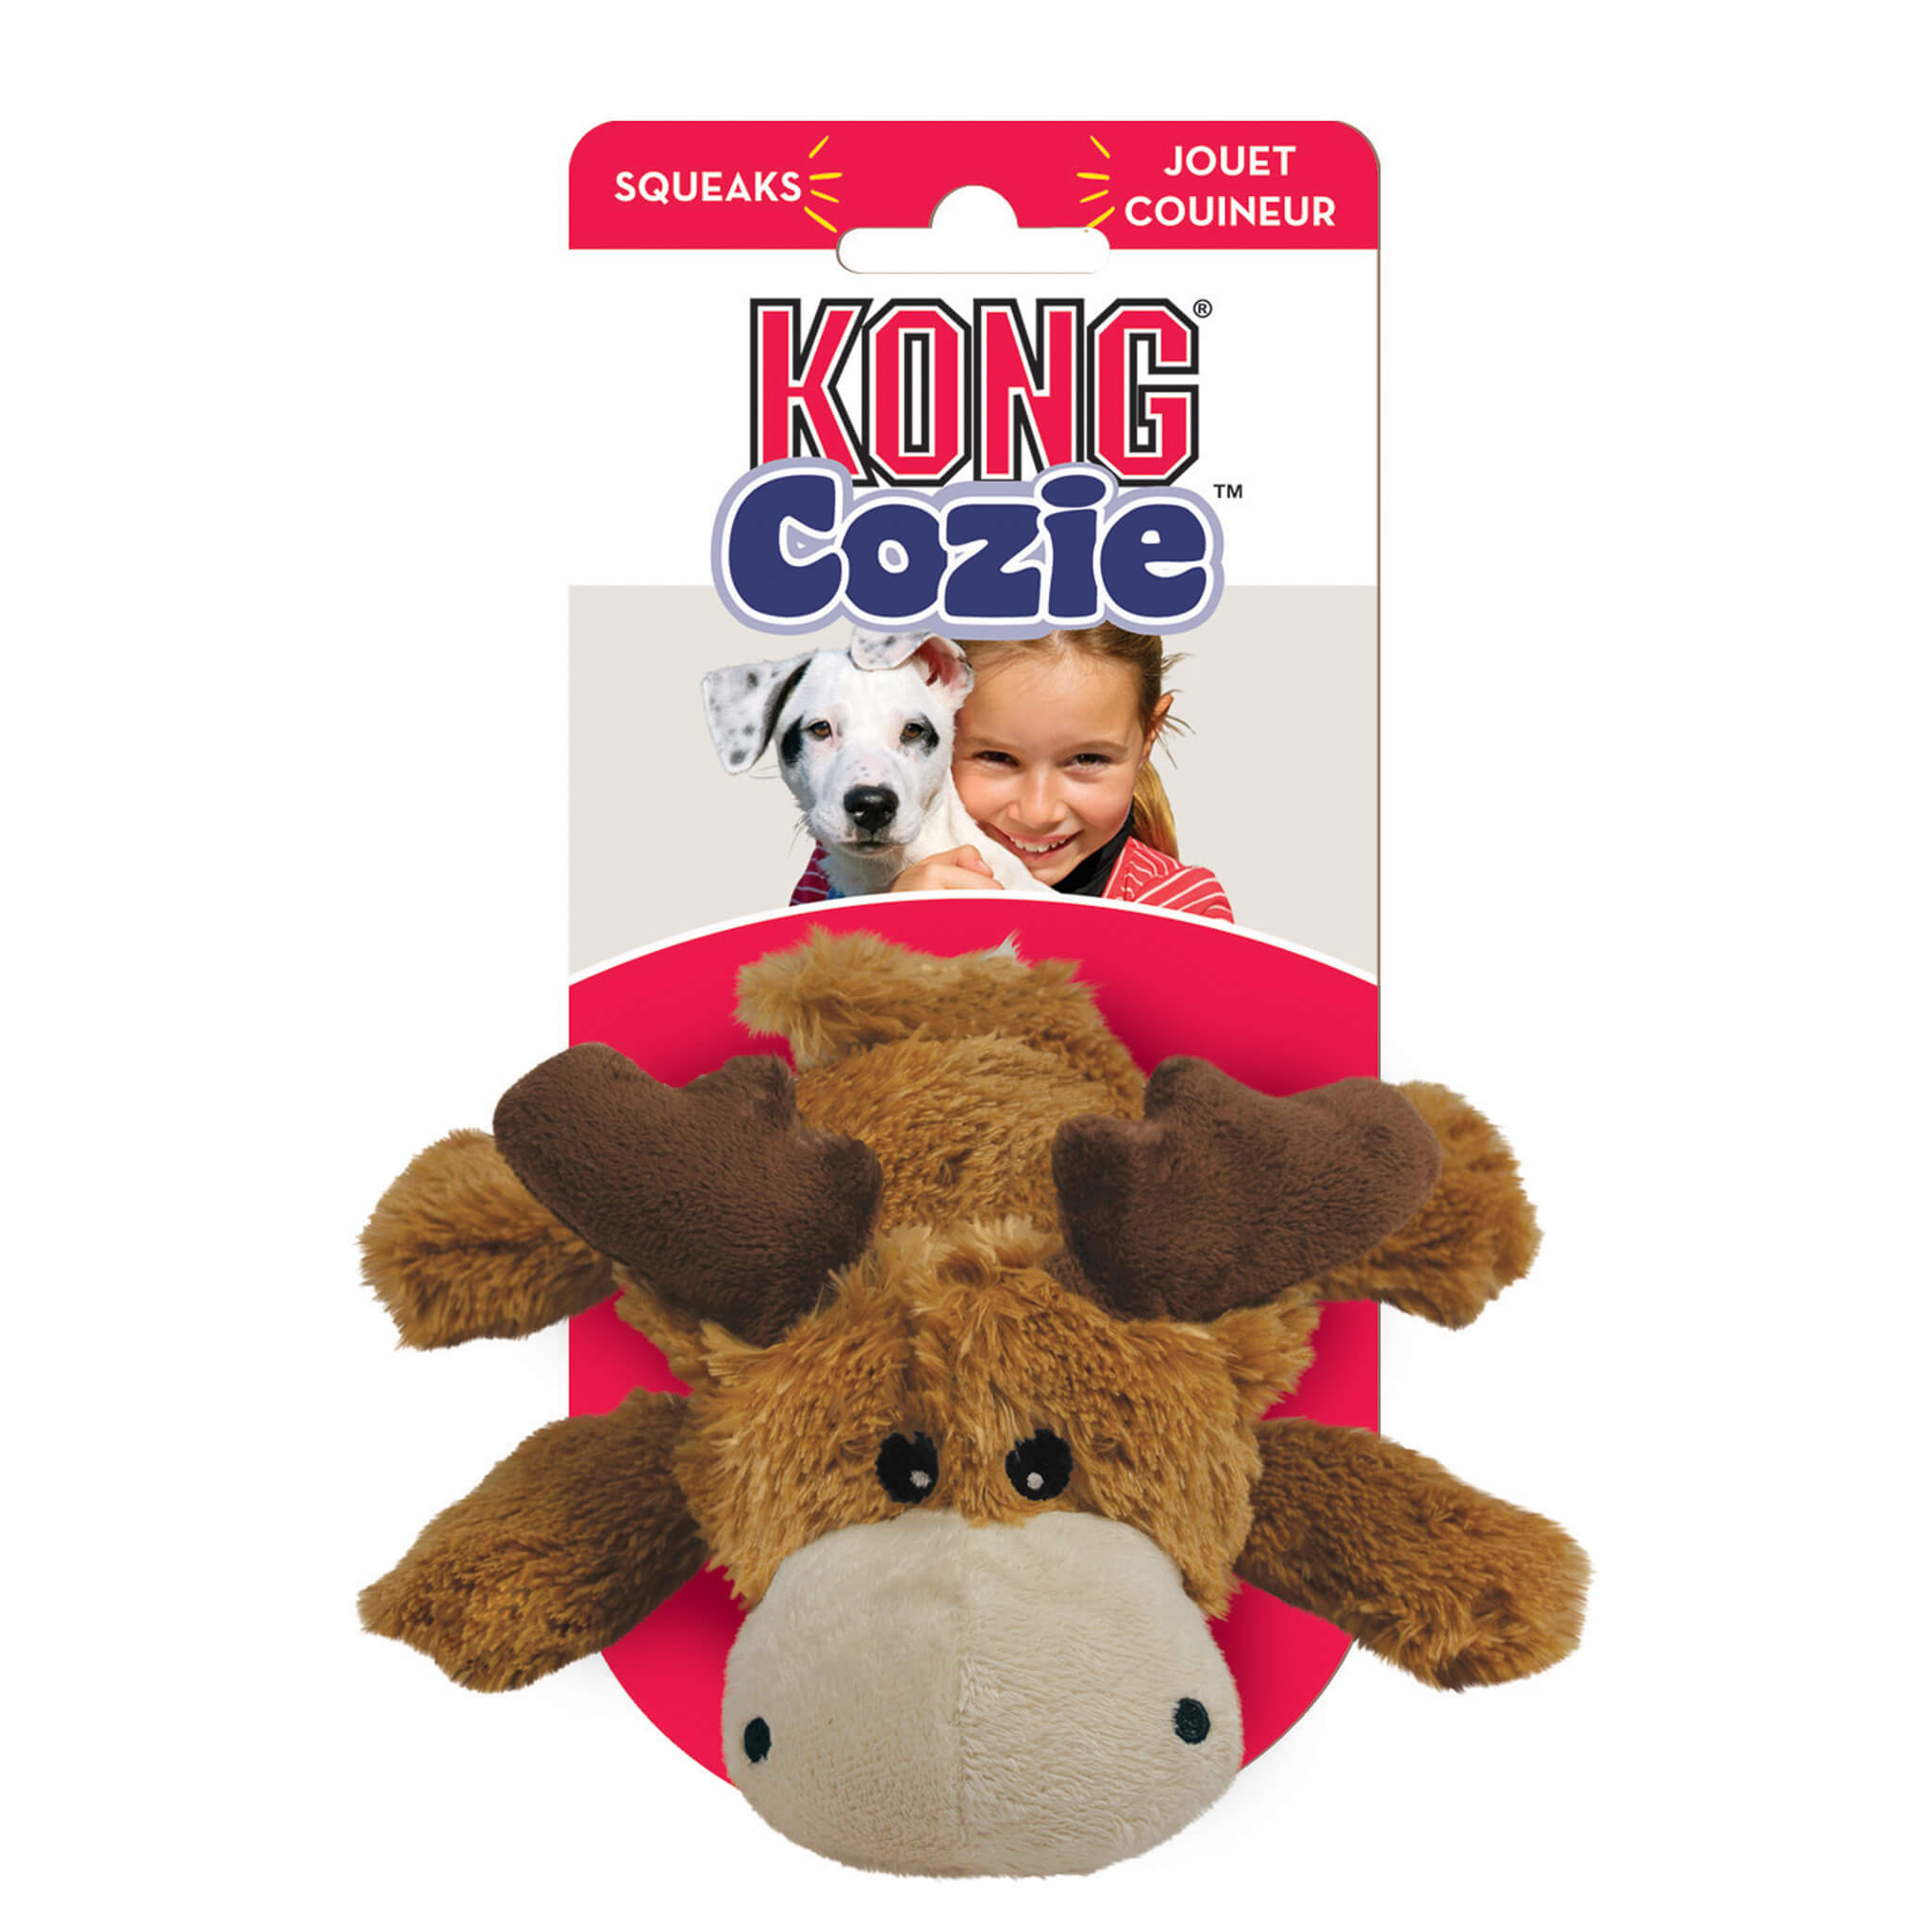 Kong dog toy - cozie marvin moose